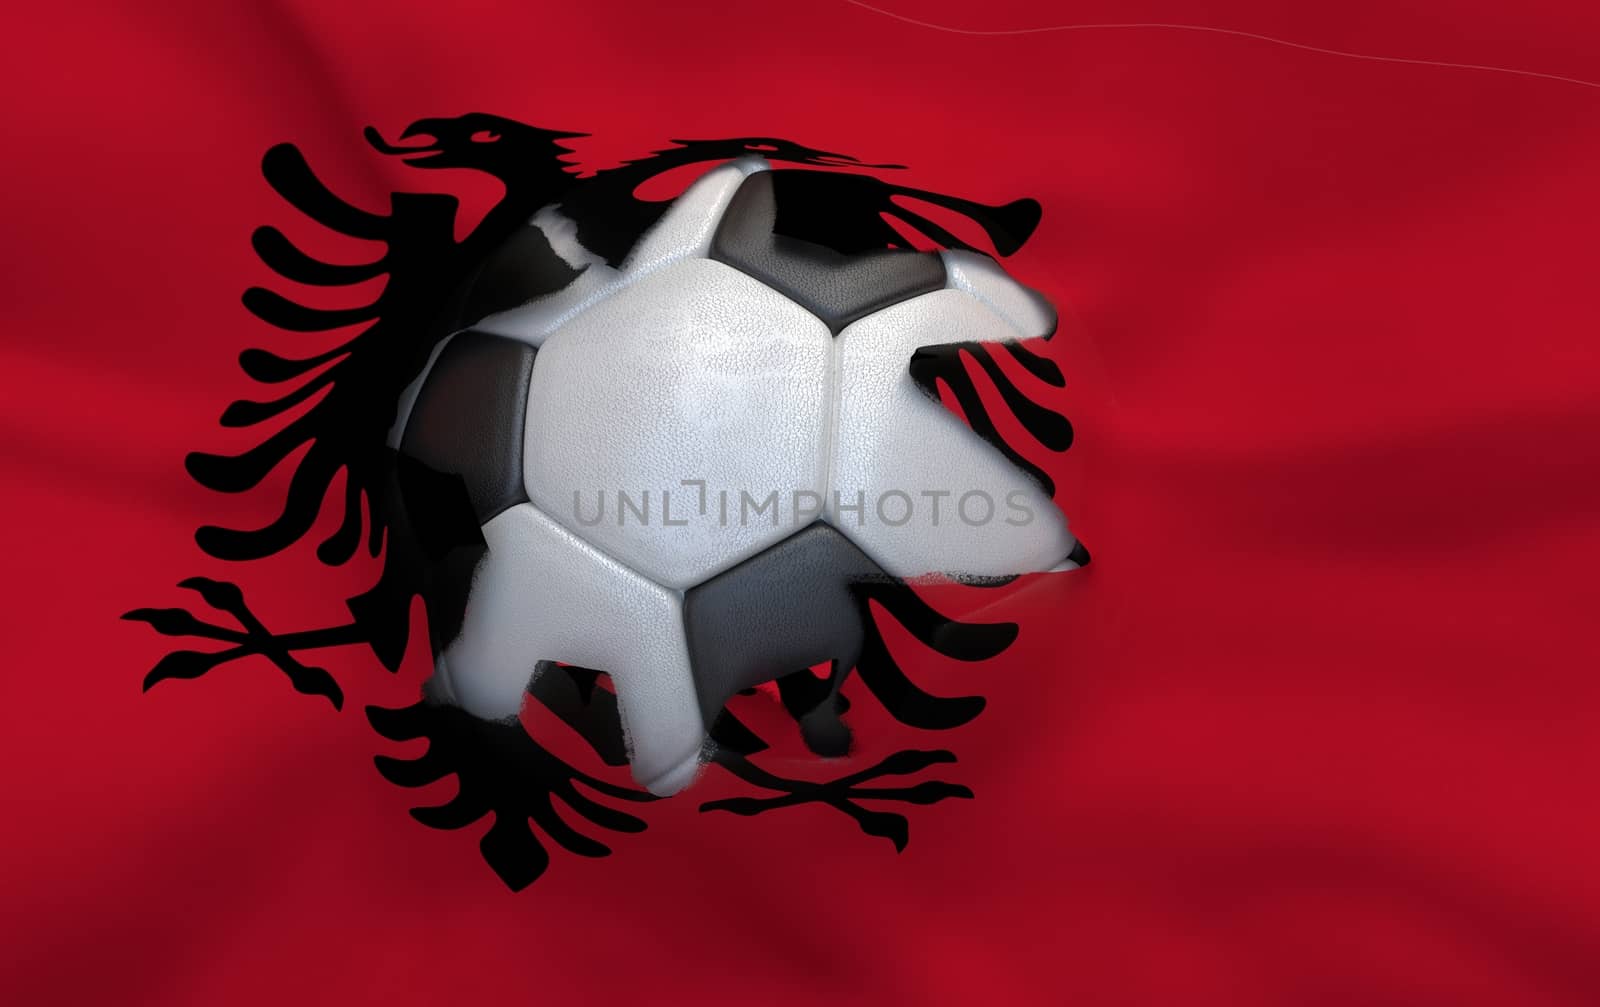 The hole in the flag of Albania and soccer ball by Barbraford